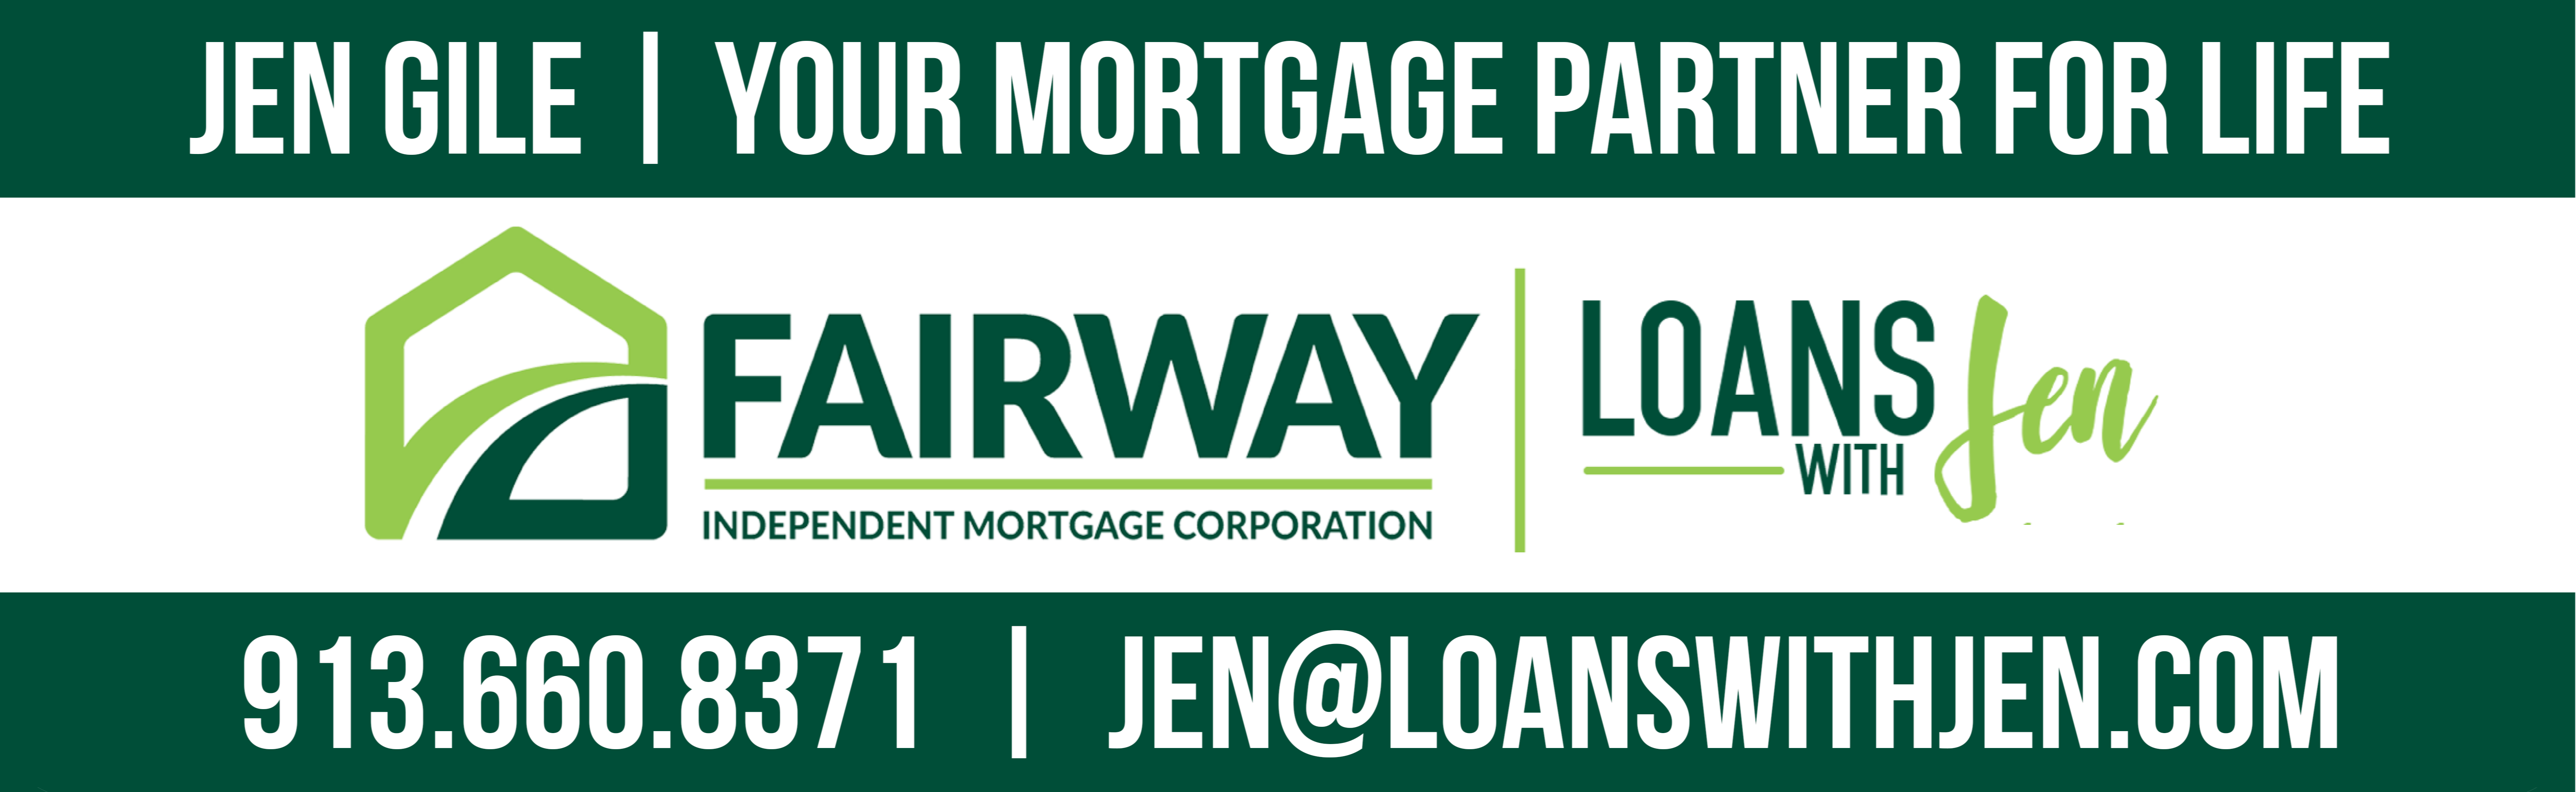 Fairway Independent Mortgage Corporation Loans with Jen